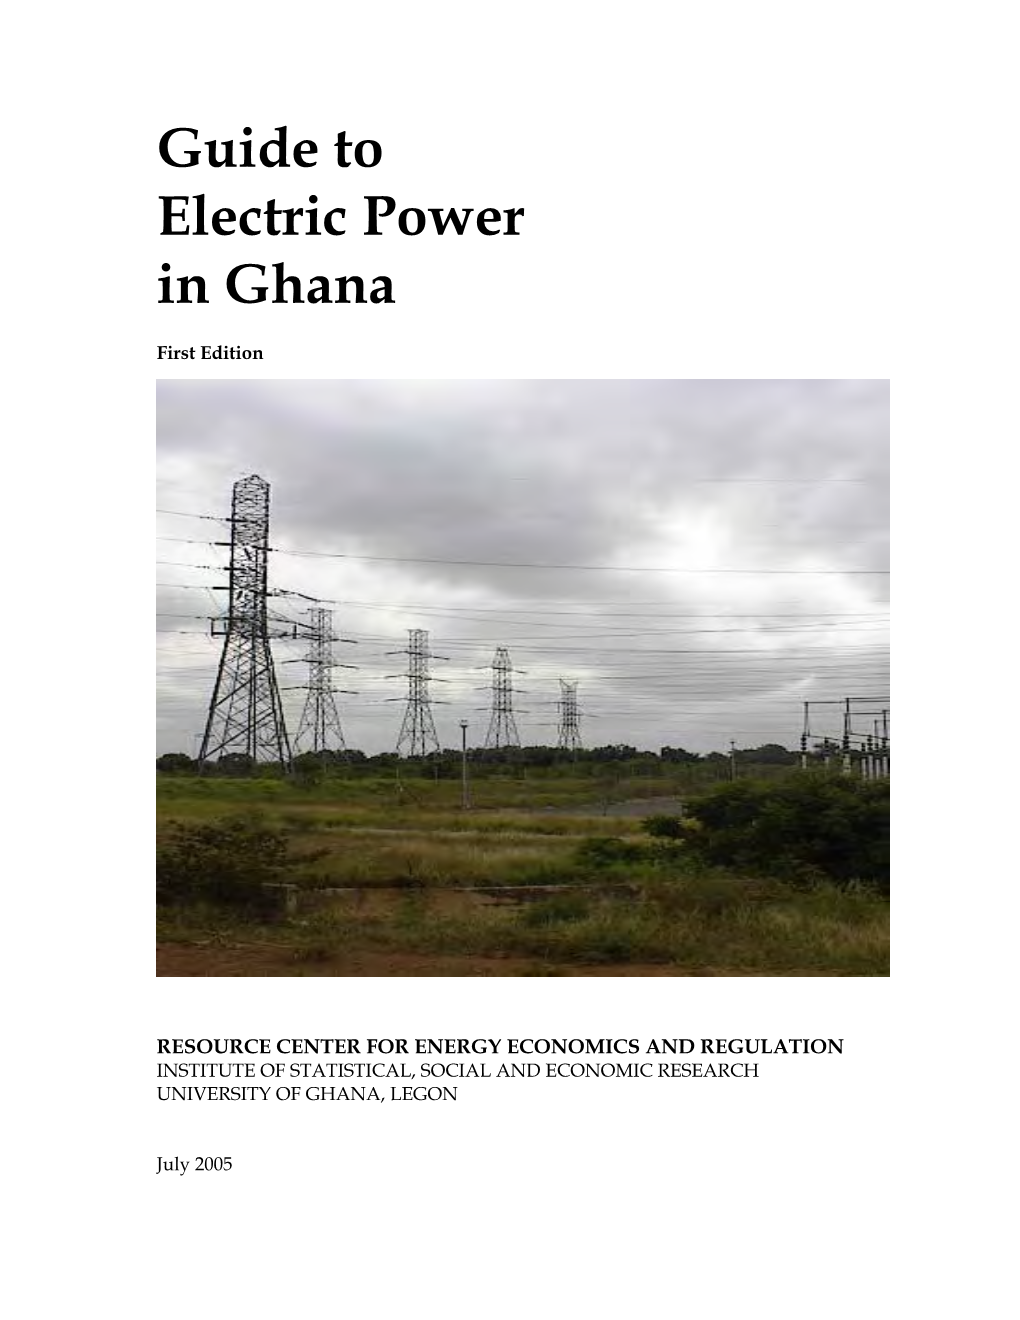 Guide to Electric Power in Ghana